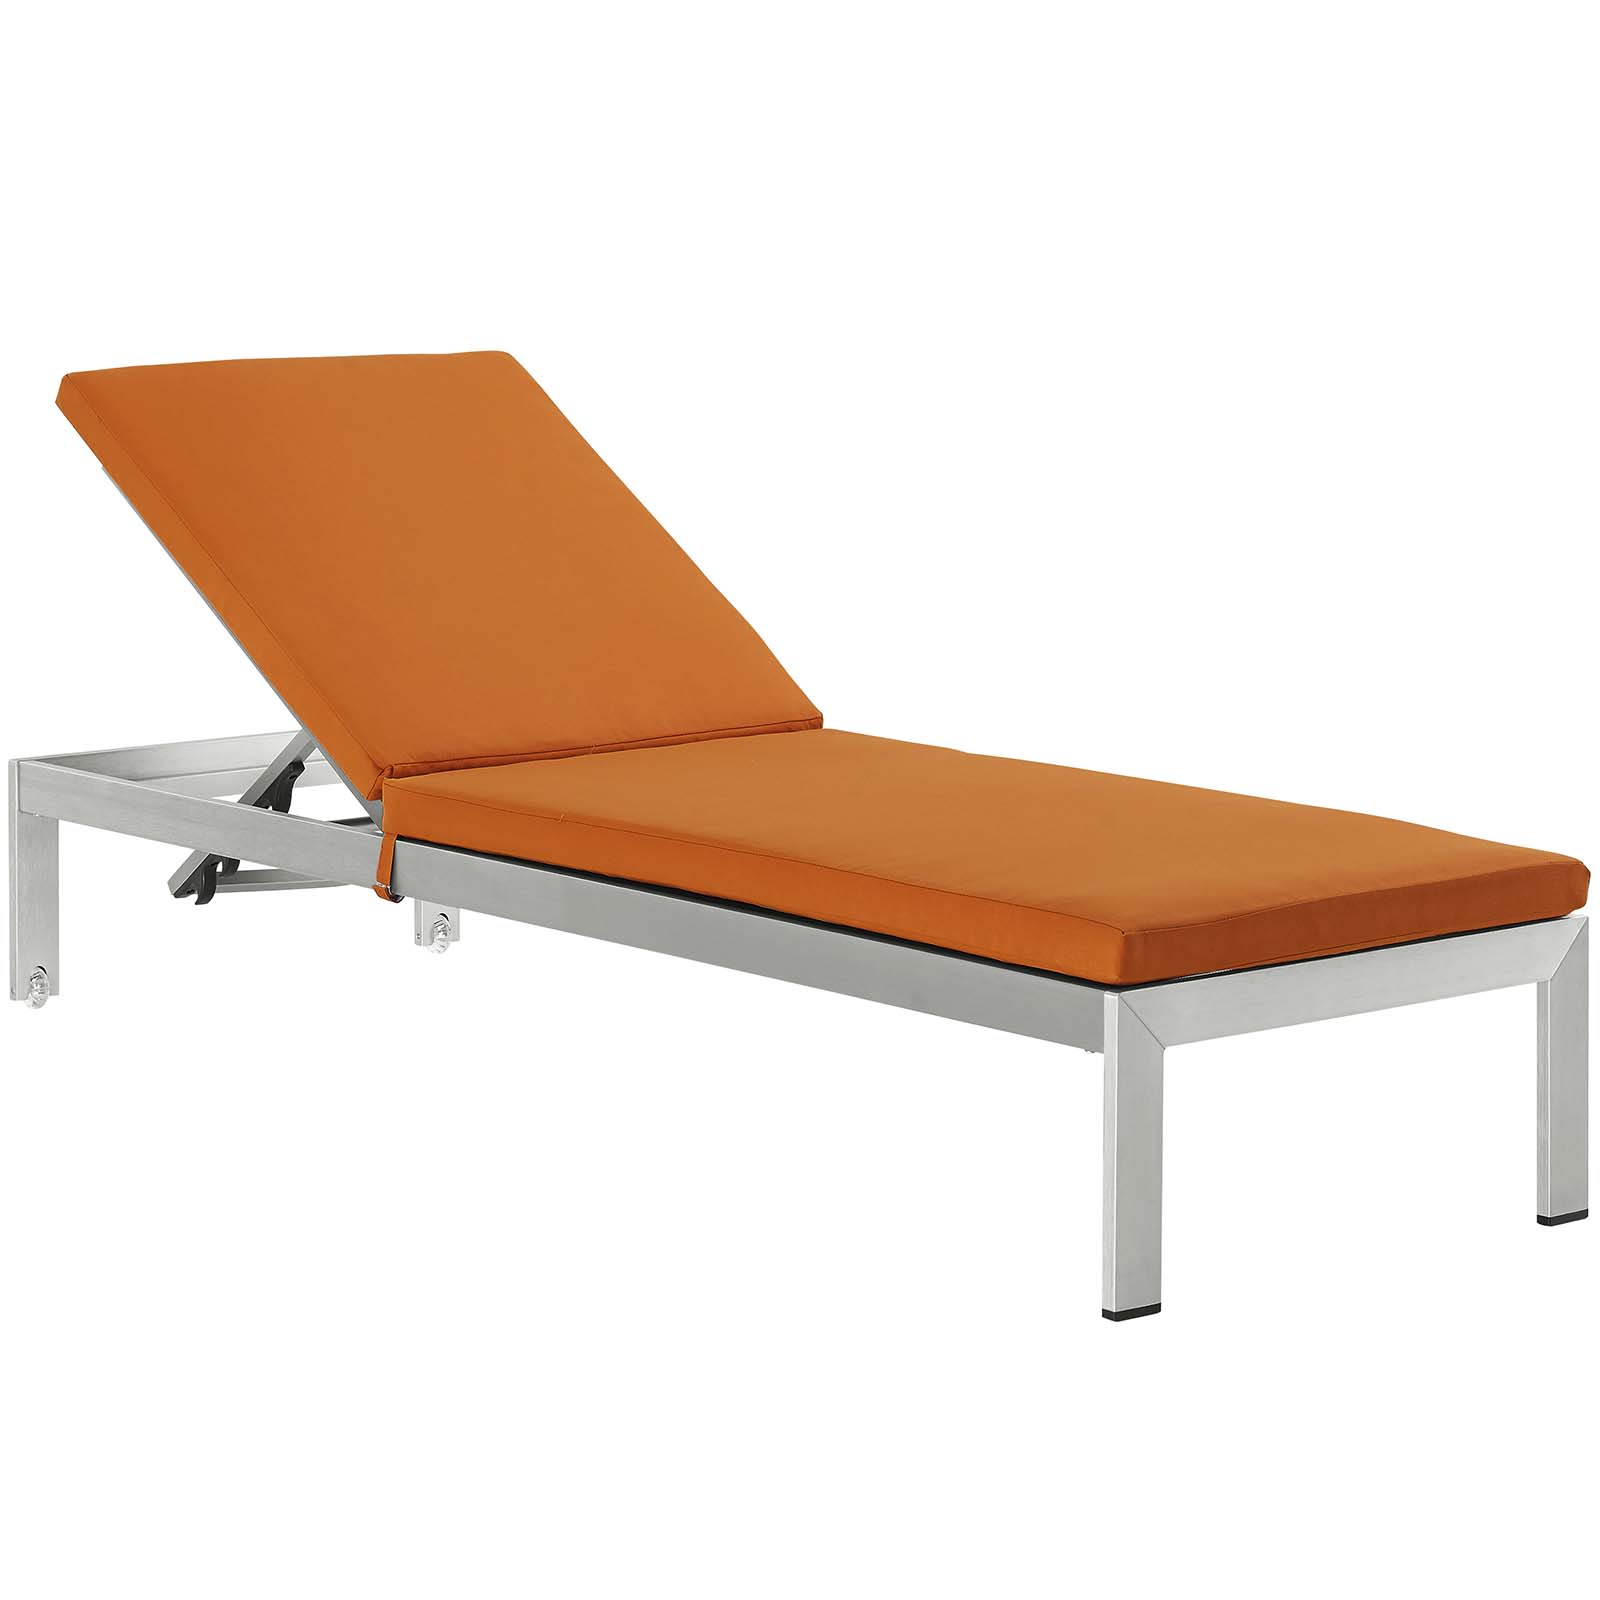 Modern Contemporary Urban Design Outdoor Patio Balcony Chaise Lounge Chair ( Set of 6), Orange, Aluminum - image 3 of 6